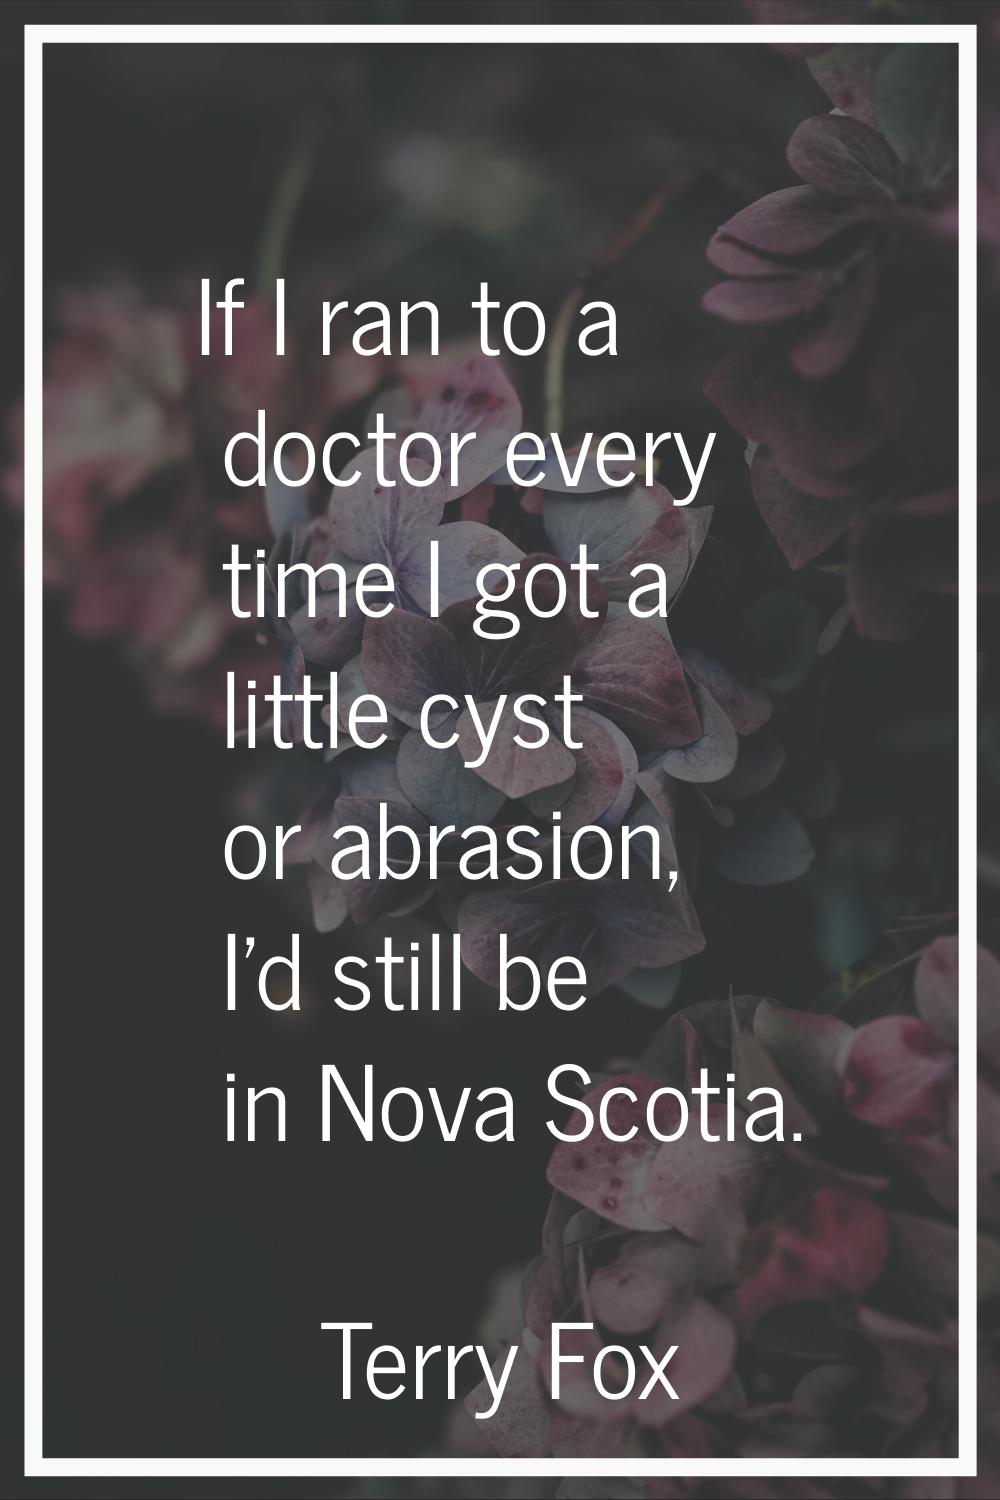 If I ran to a doctor every time I got a little cyst or abrasion, I'd still be in Nova Scotia.